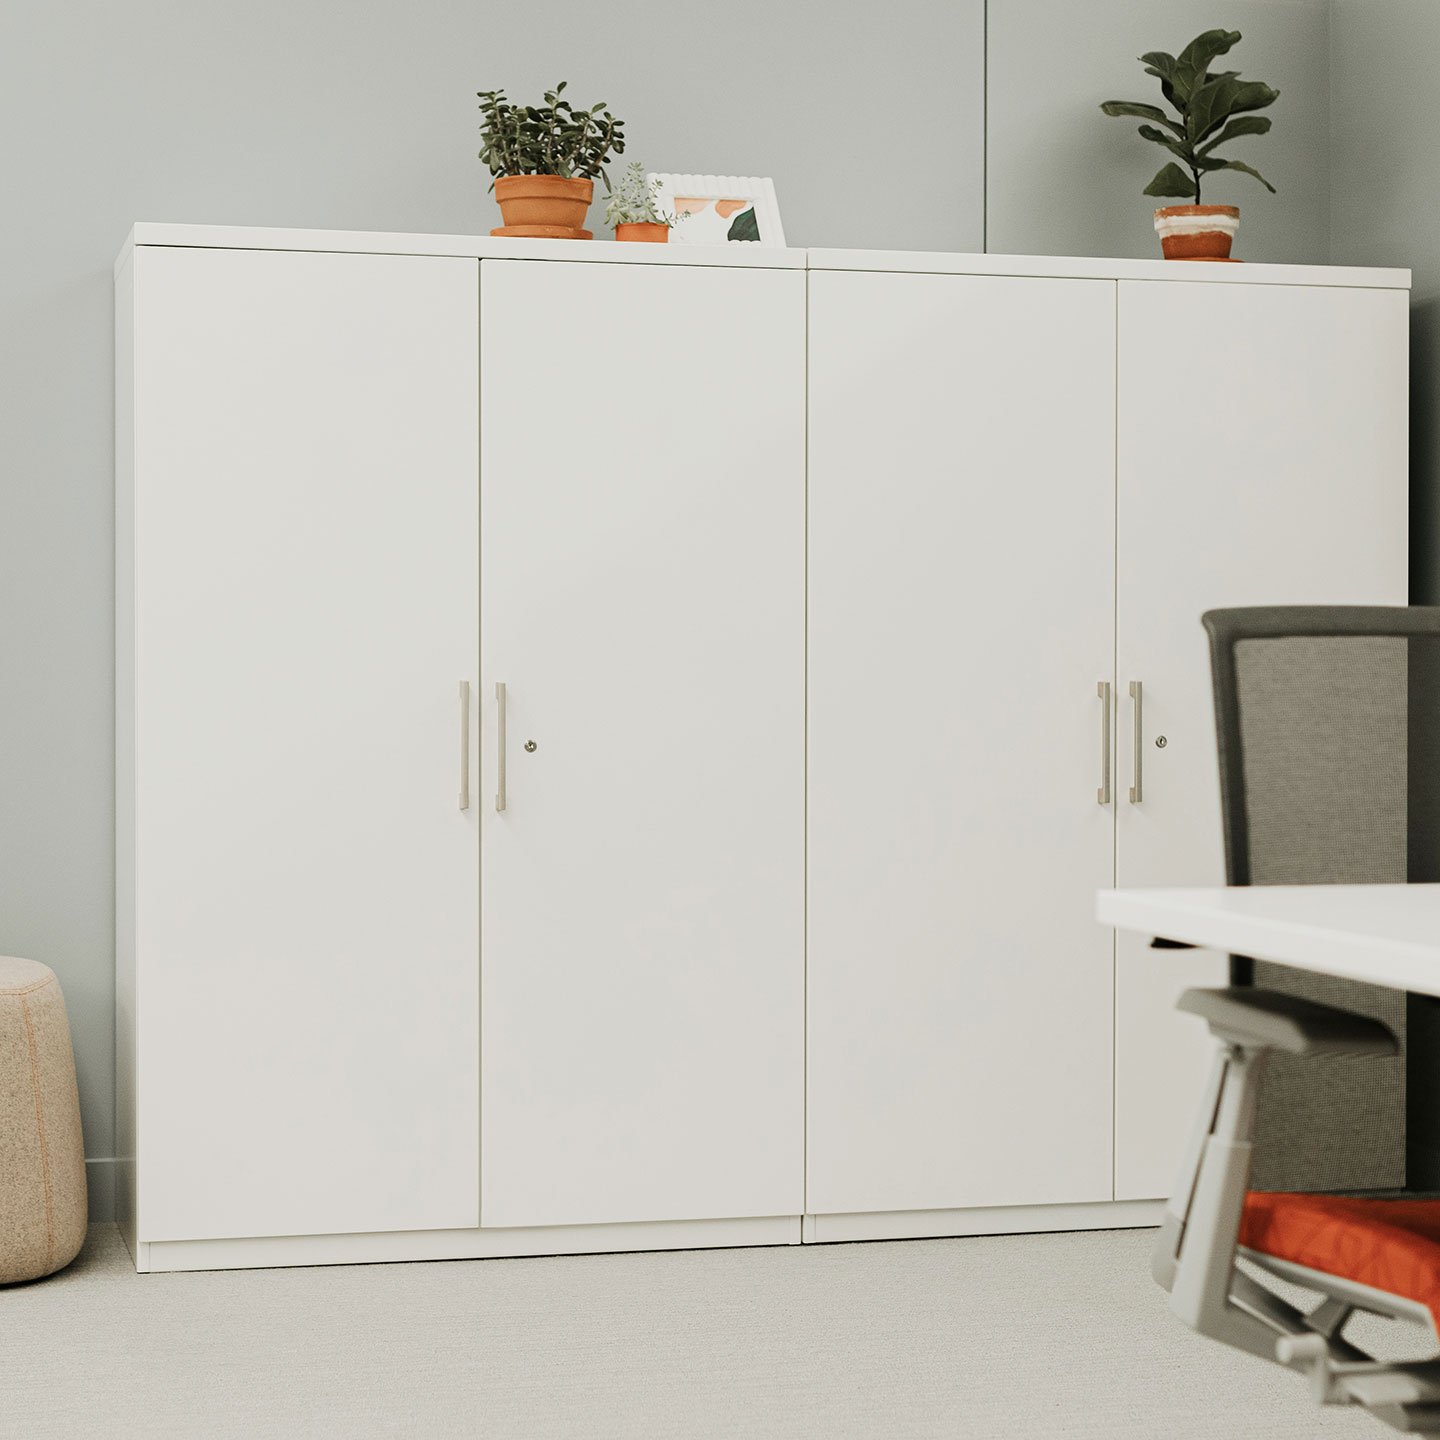 X Series storage cabinet with hinge doors and linear handles